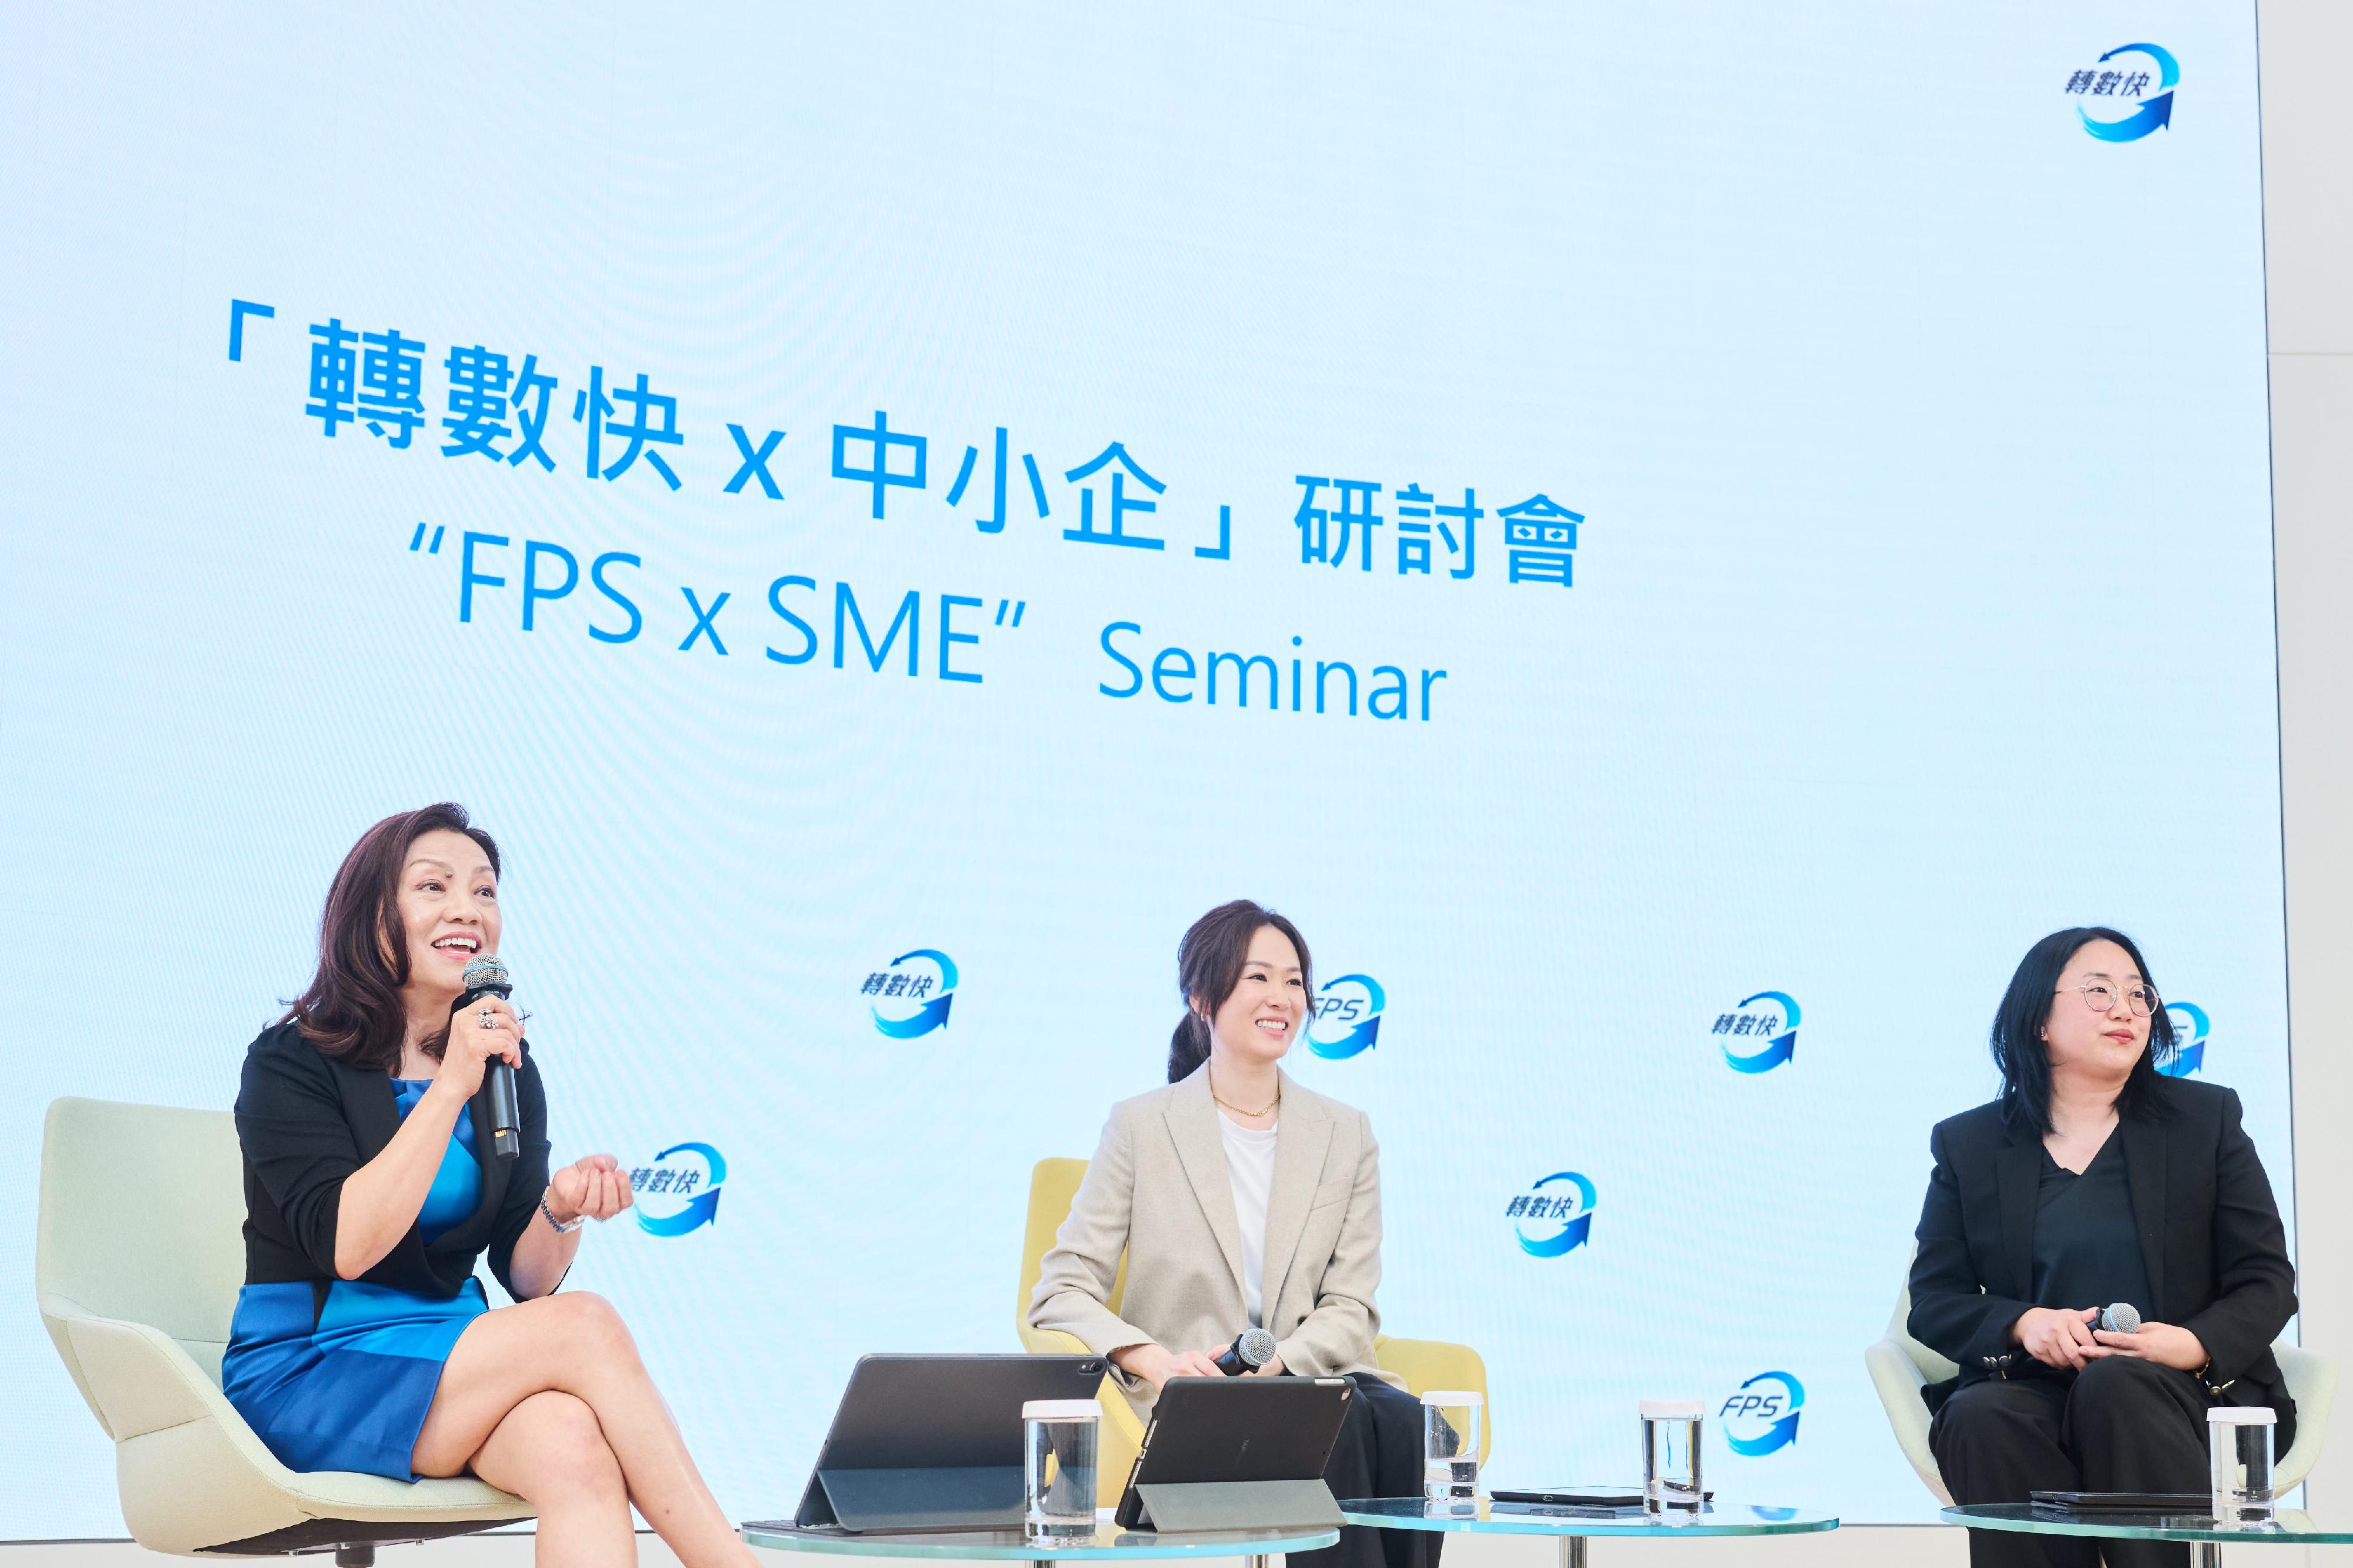 The Hong Kong Monetary Authority (HKMA) organised the "FPS x SME" Seminar today (September 26). Photo shows representatives of two small and medium-sized enterprises, Co-founder of Cookieism Ms Eva Fung (second right) and Co-Chief Executive Officer & Co-founder of FreightAmigo, Ms Ivy Tse (first right), sharing their experience of using Faster Payment System at the seminar. This session is hosted by the Chief Executive Officer of the Hong Kong Interbank Clearing Limited, Ms Haster Tang (first left).